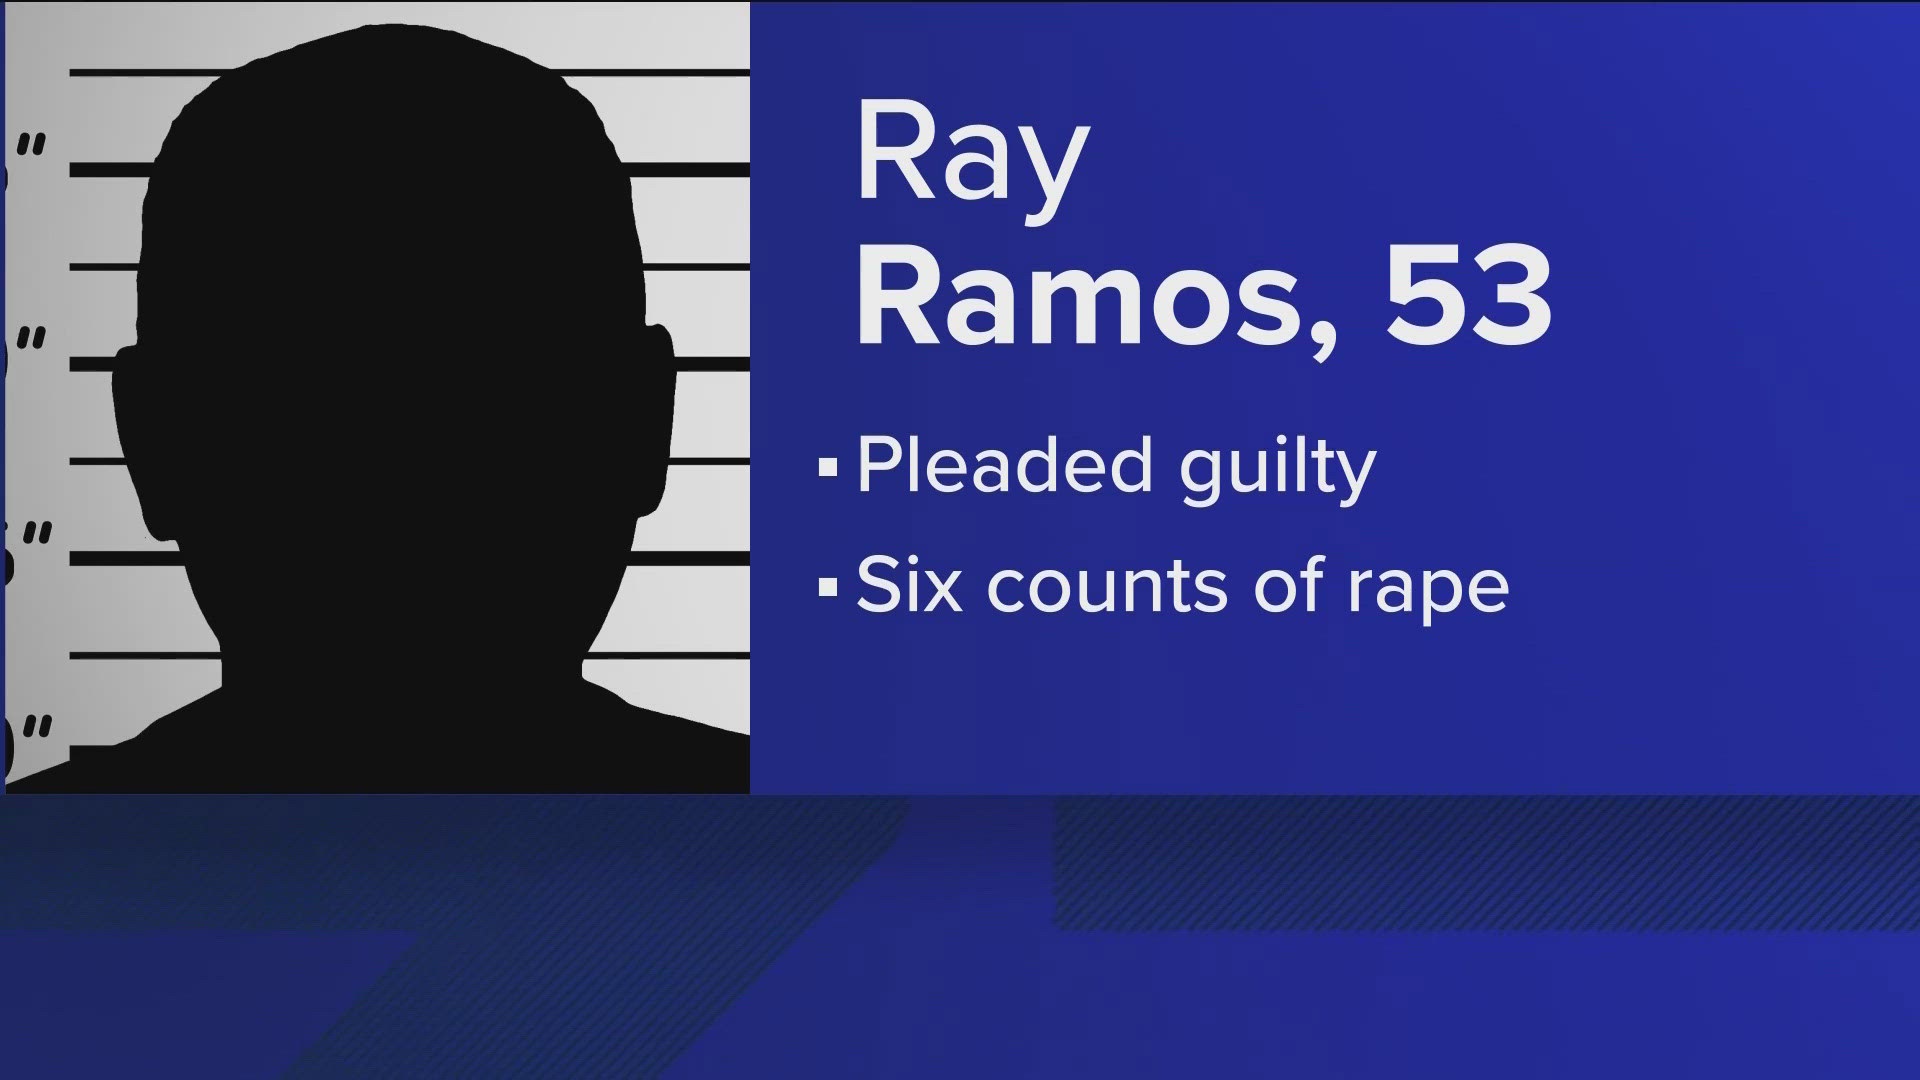 Ray Ramos, 53, is scheduled to be sentenced on July 24.